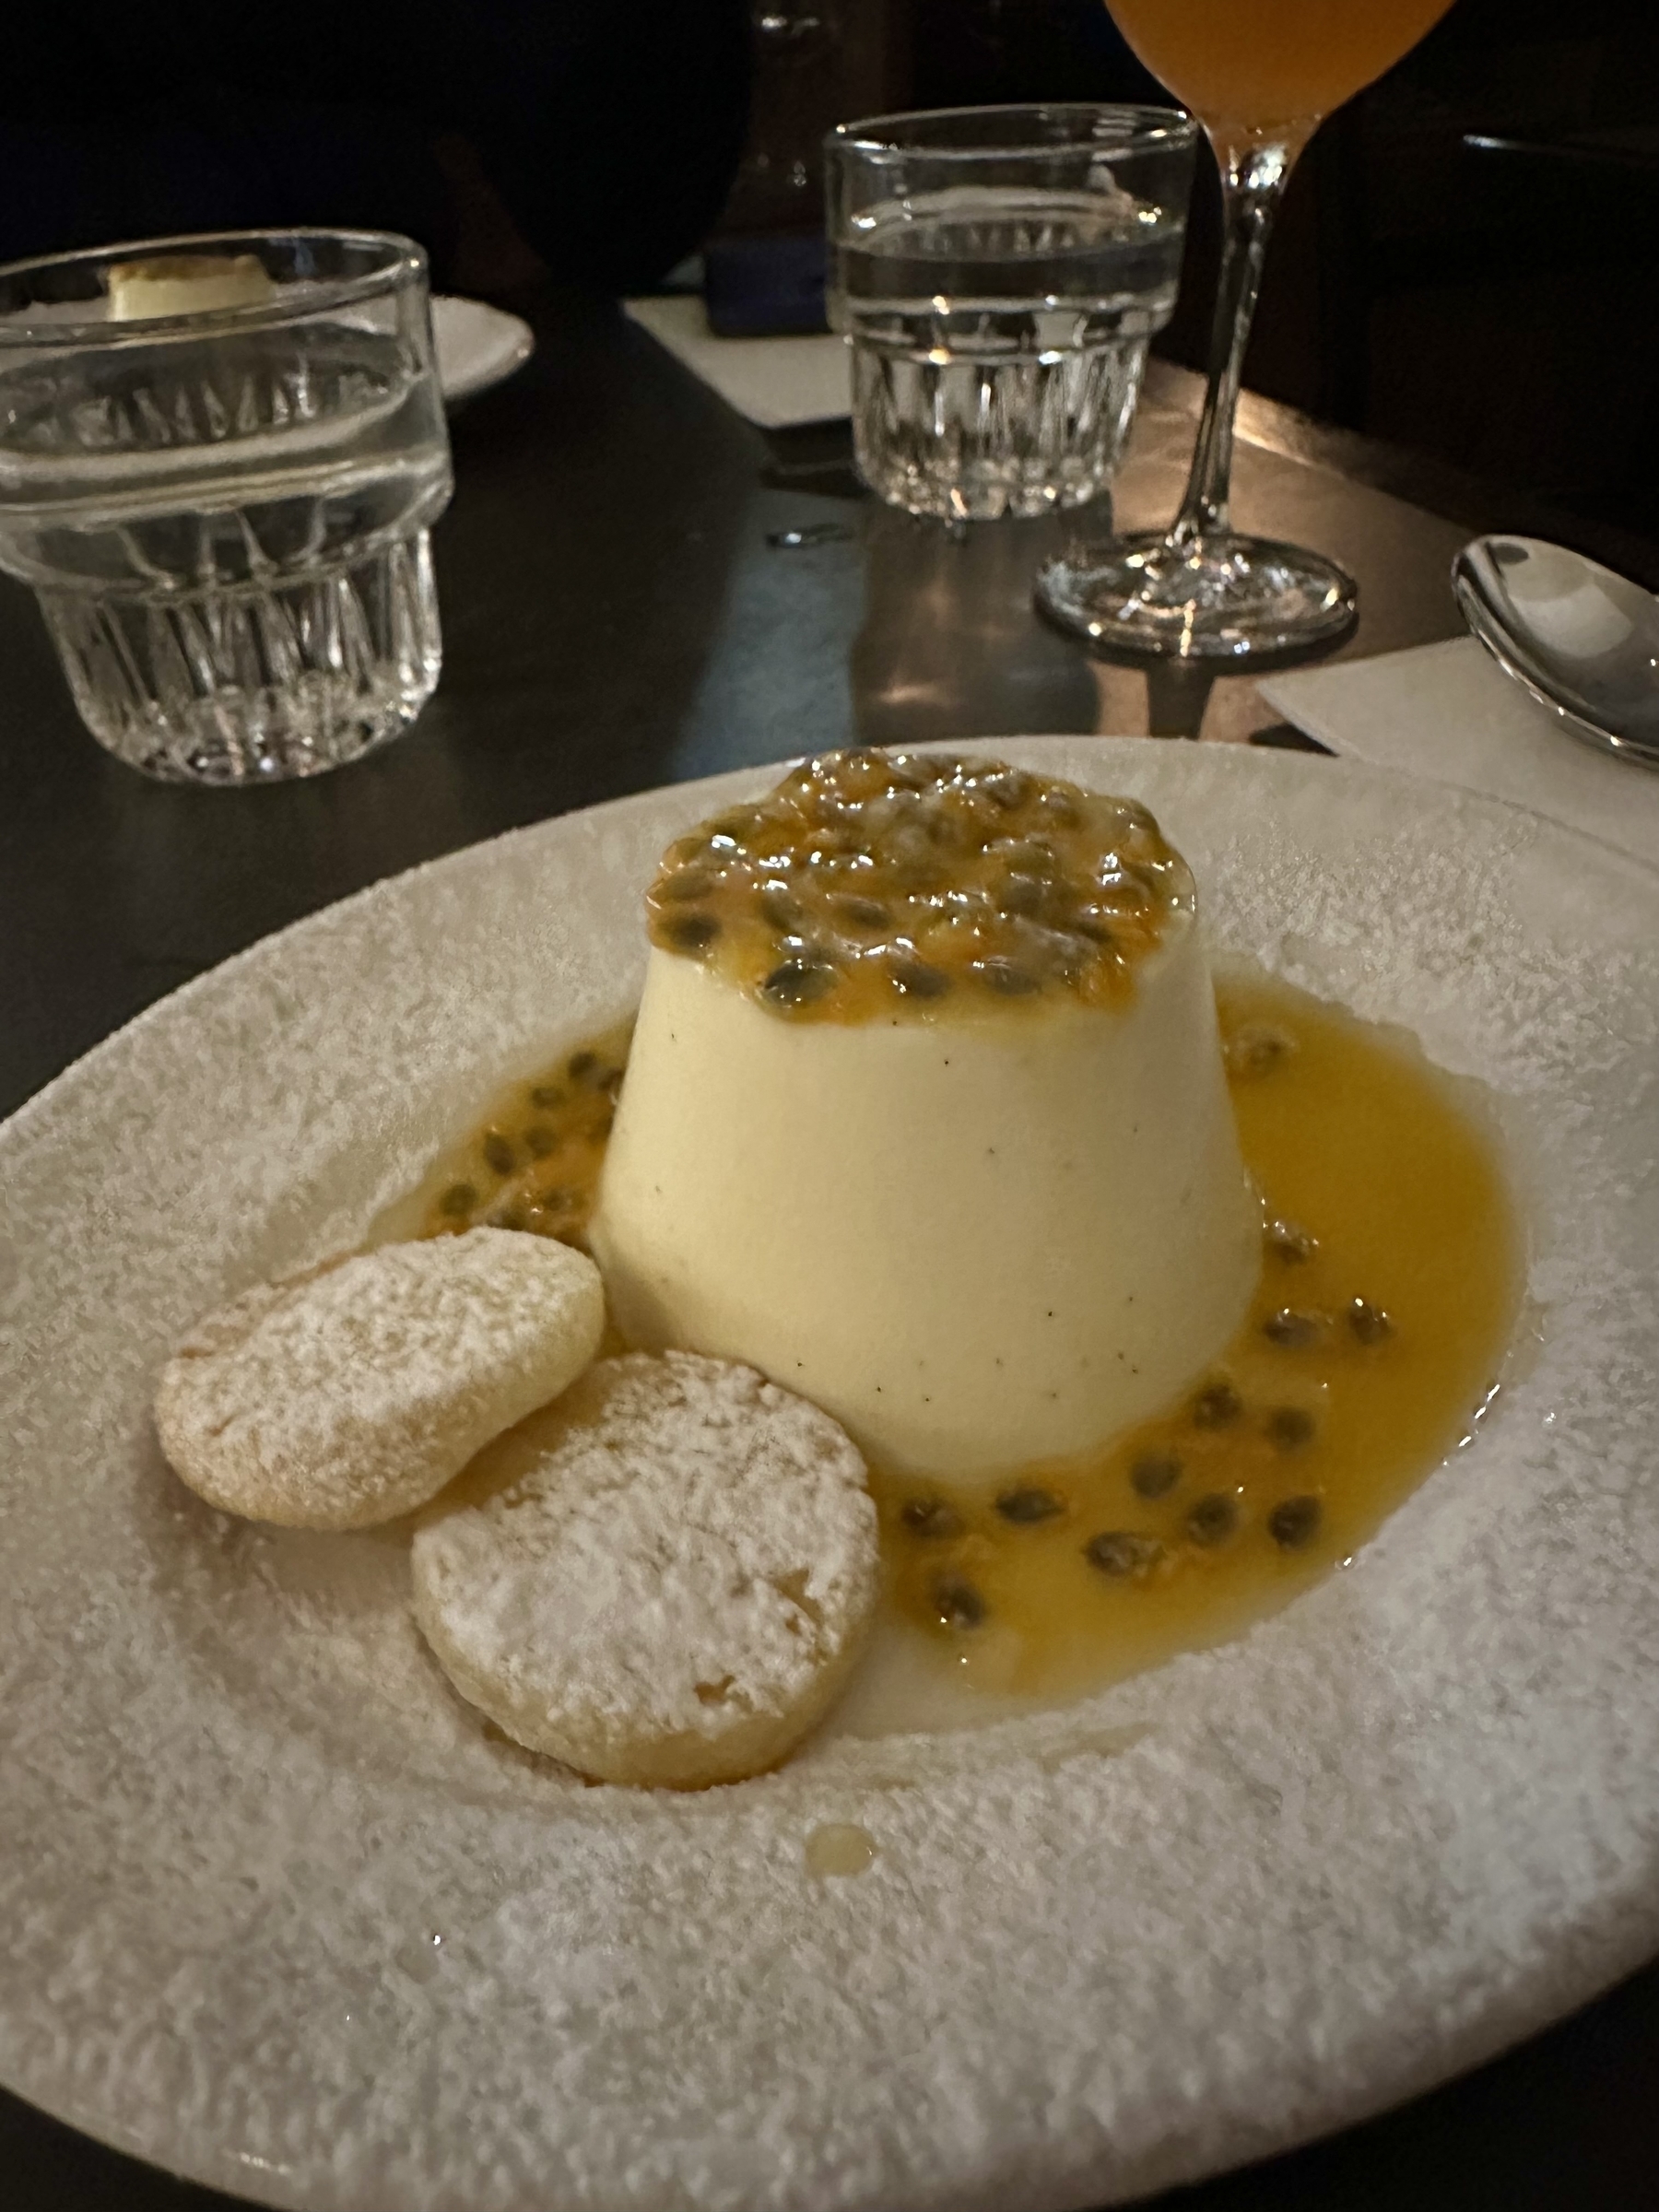 A vanilla white coloured soft almost cylindrical dessert sitting in a shallow plate with passion fruit pulp surrounding it and layered on top. Two small round shortbread biscuits are beside it and the plate is lightly dusted in flour.